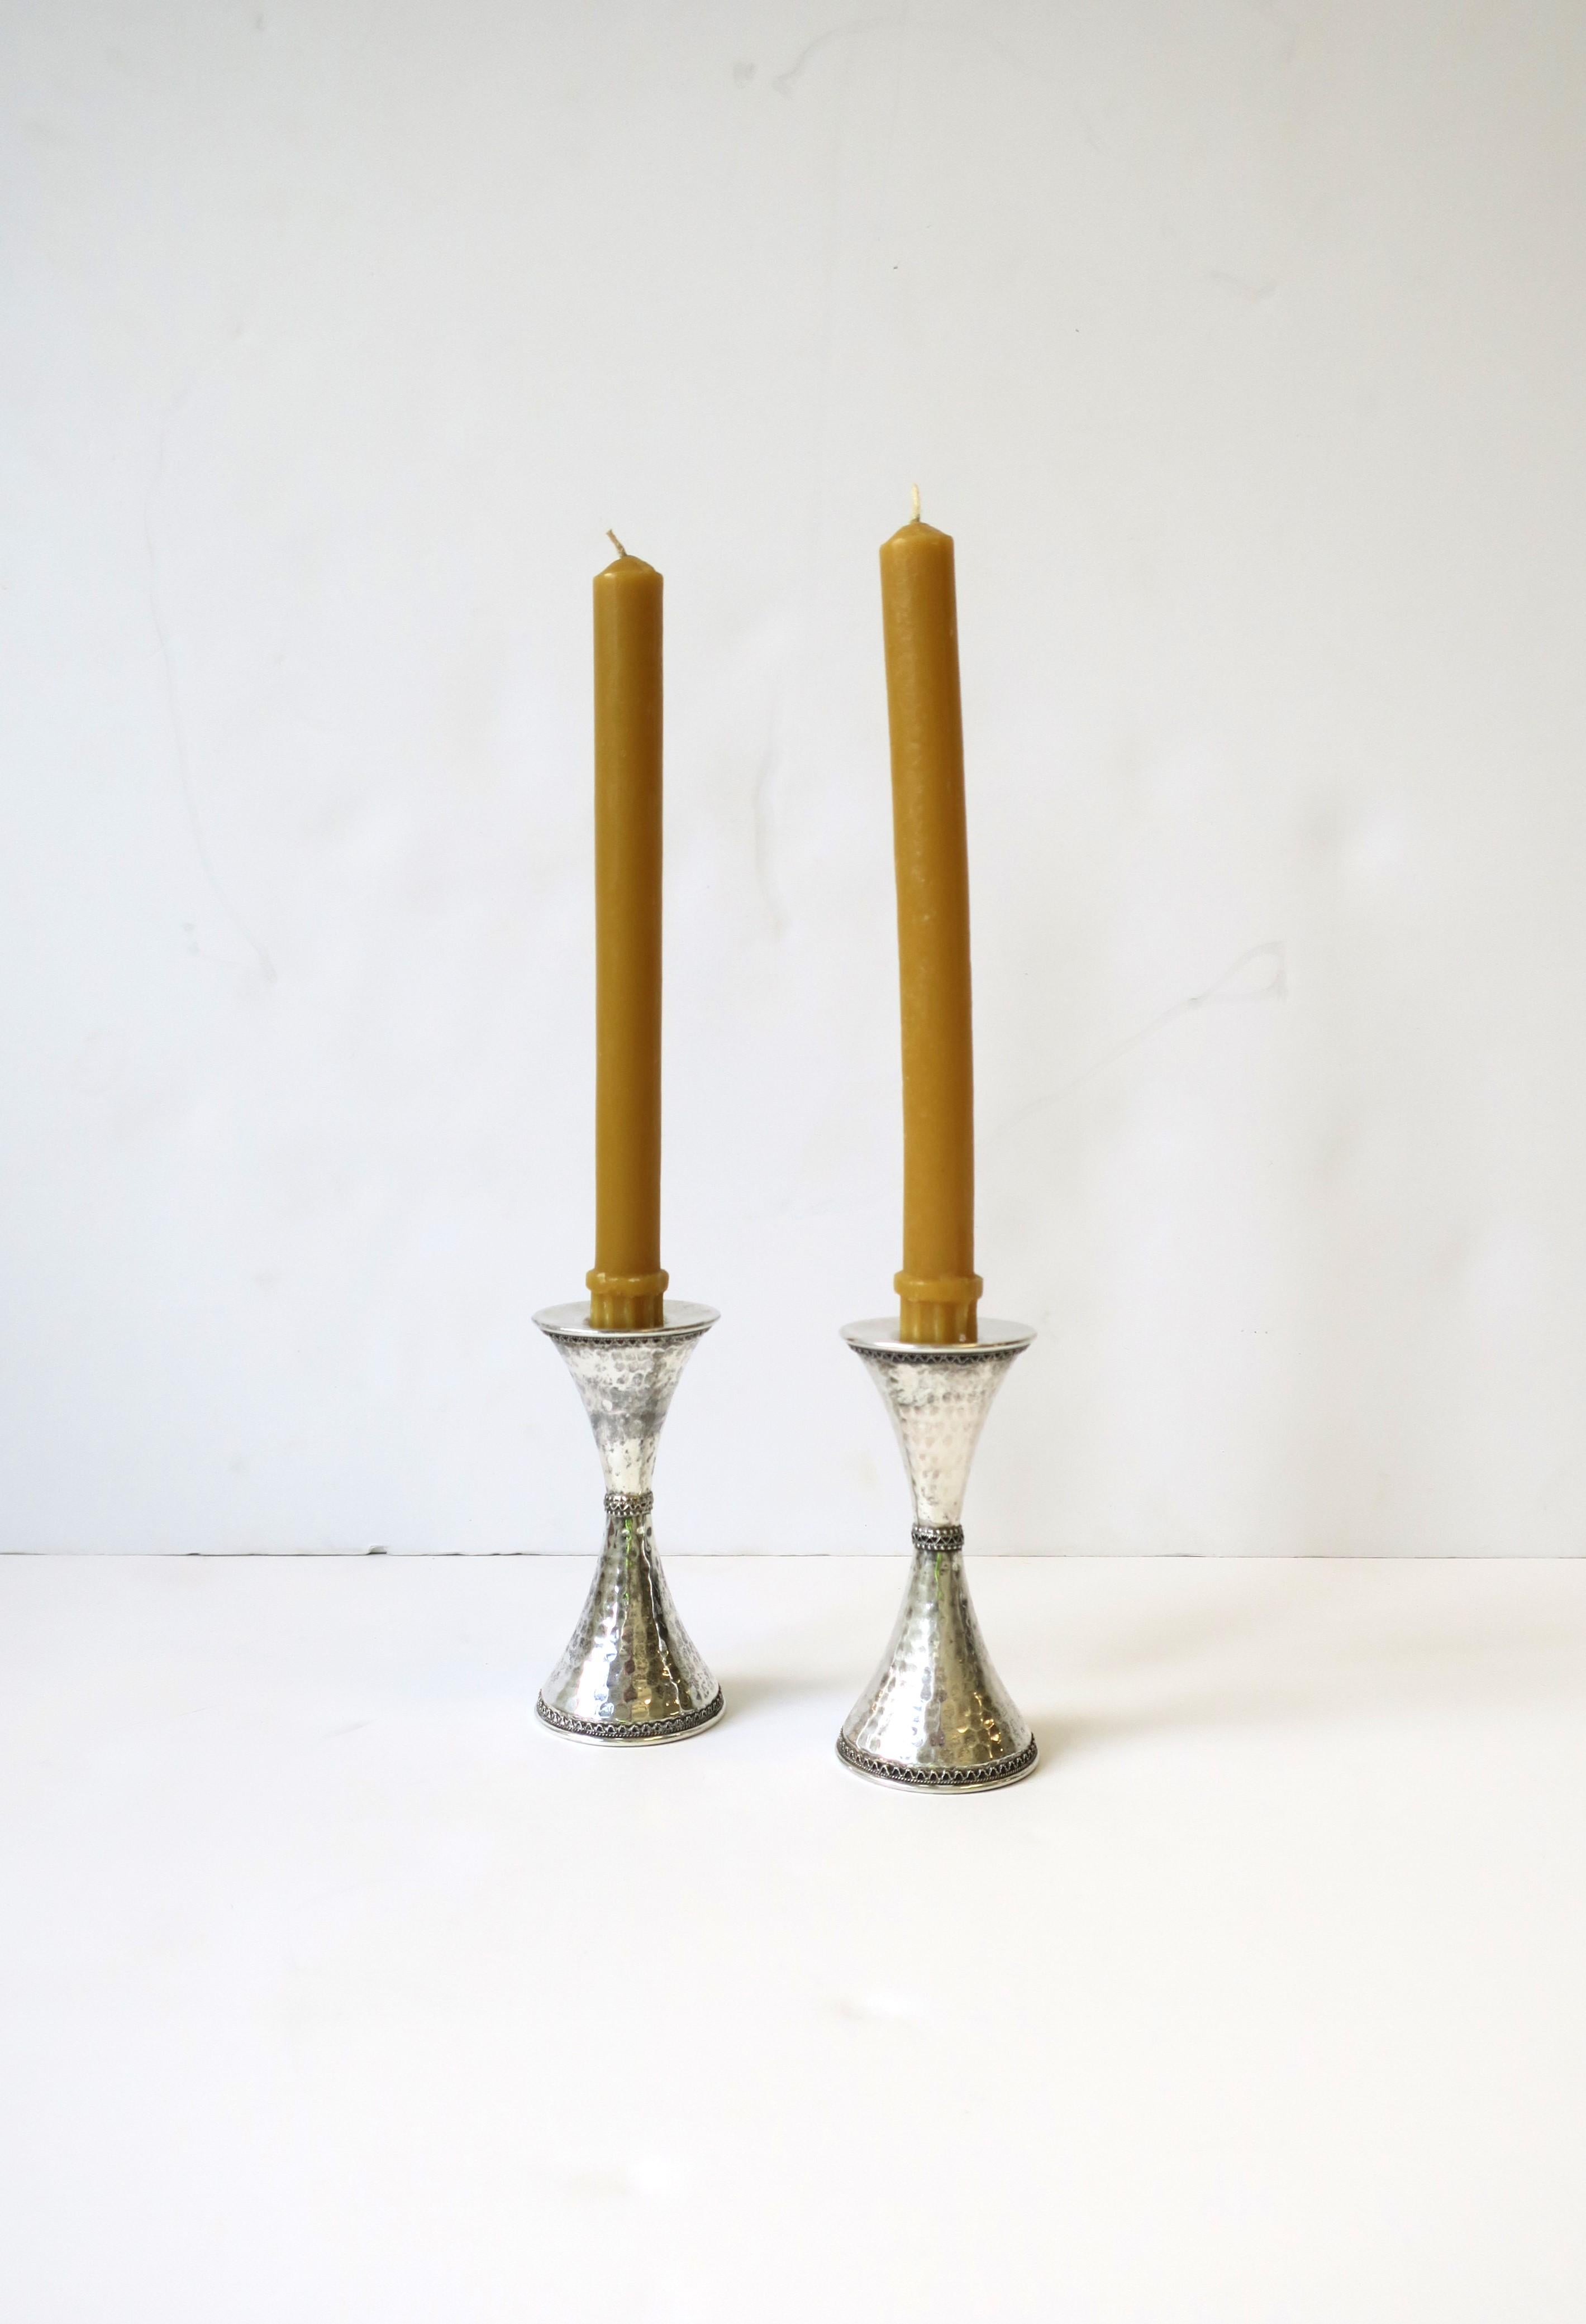 20th Century Sterling Silver Candlesticks Holders Hourglass Shape Hammered Design, Pair For Sale